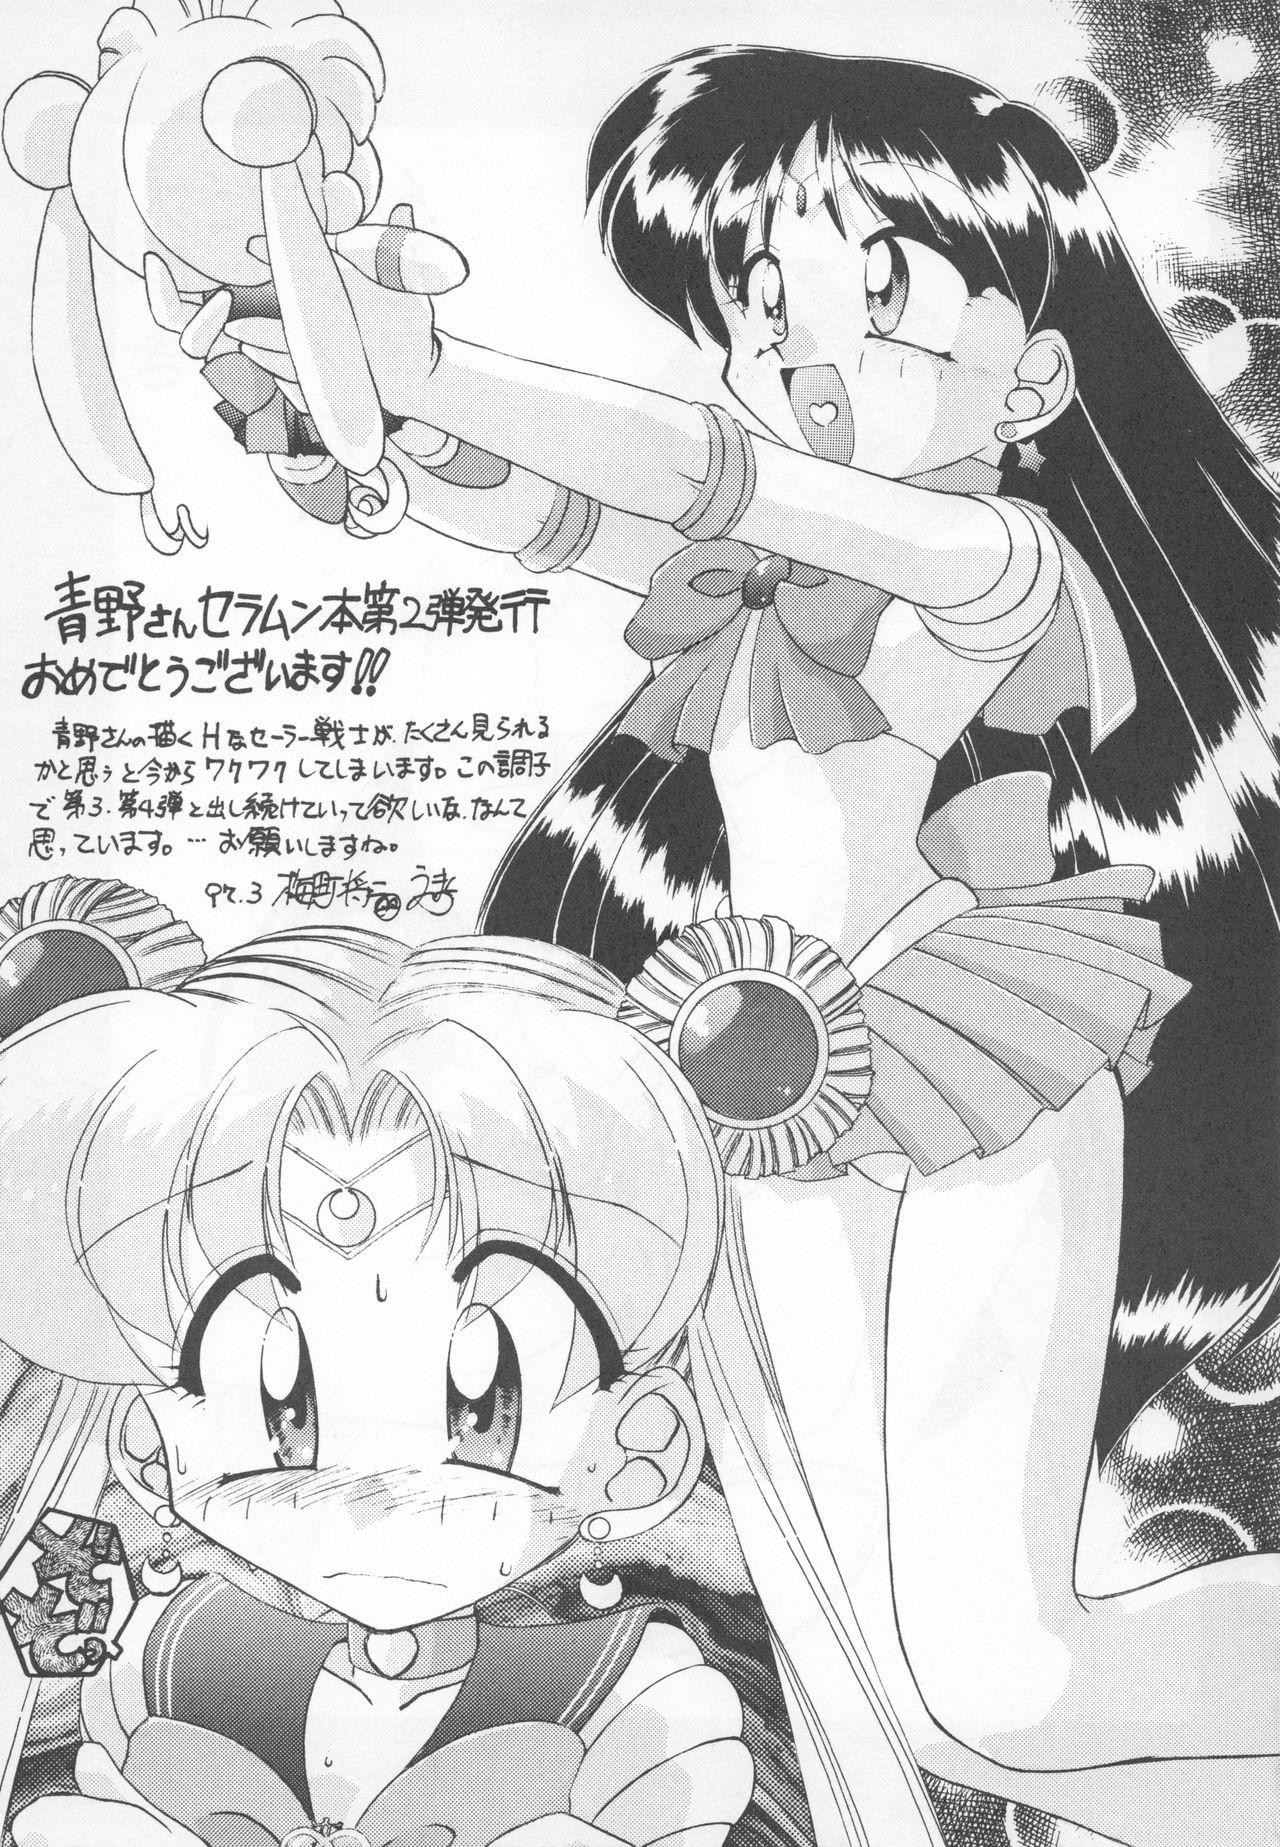 Sailor Moon 1 Page Gekijou P2 - SAILOR MOON ONE PAGE THEATER II 92